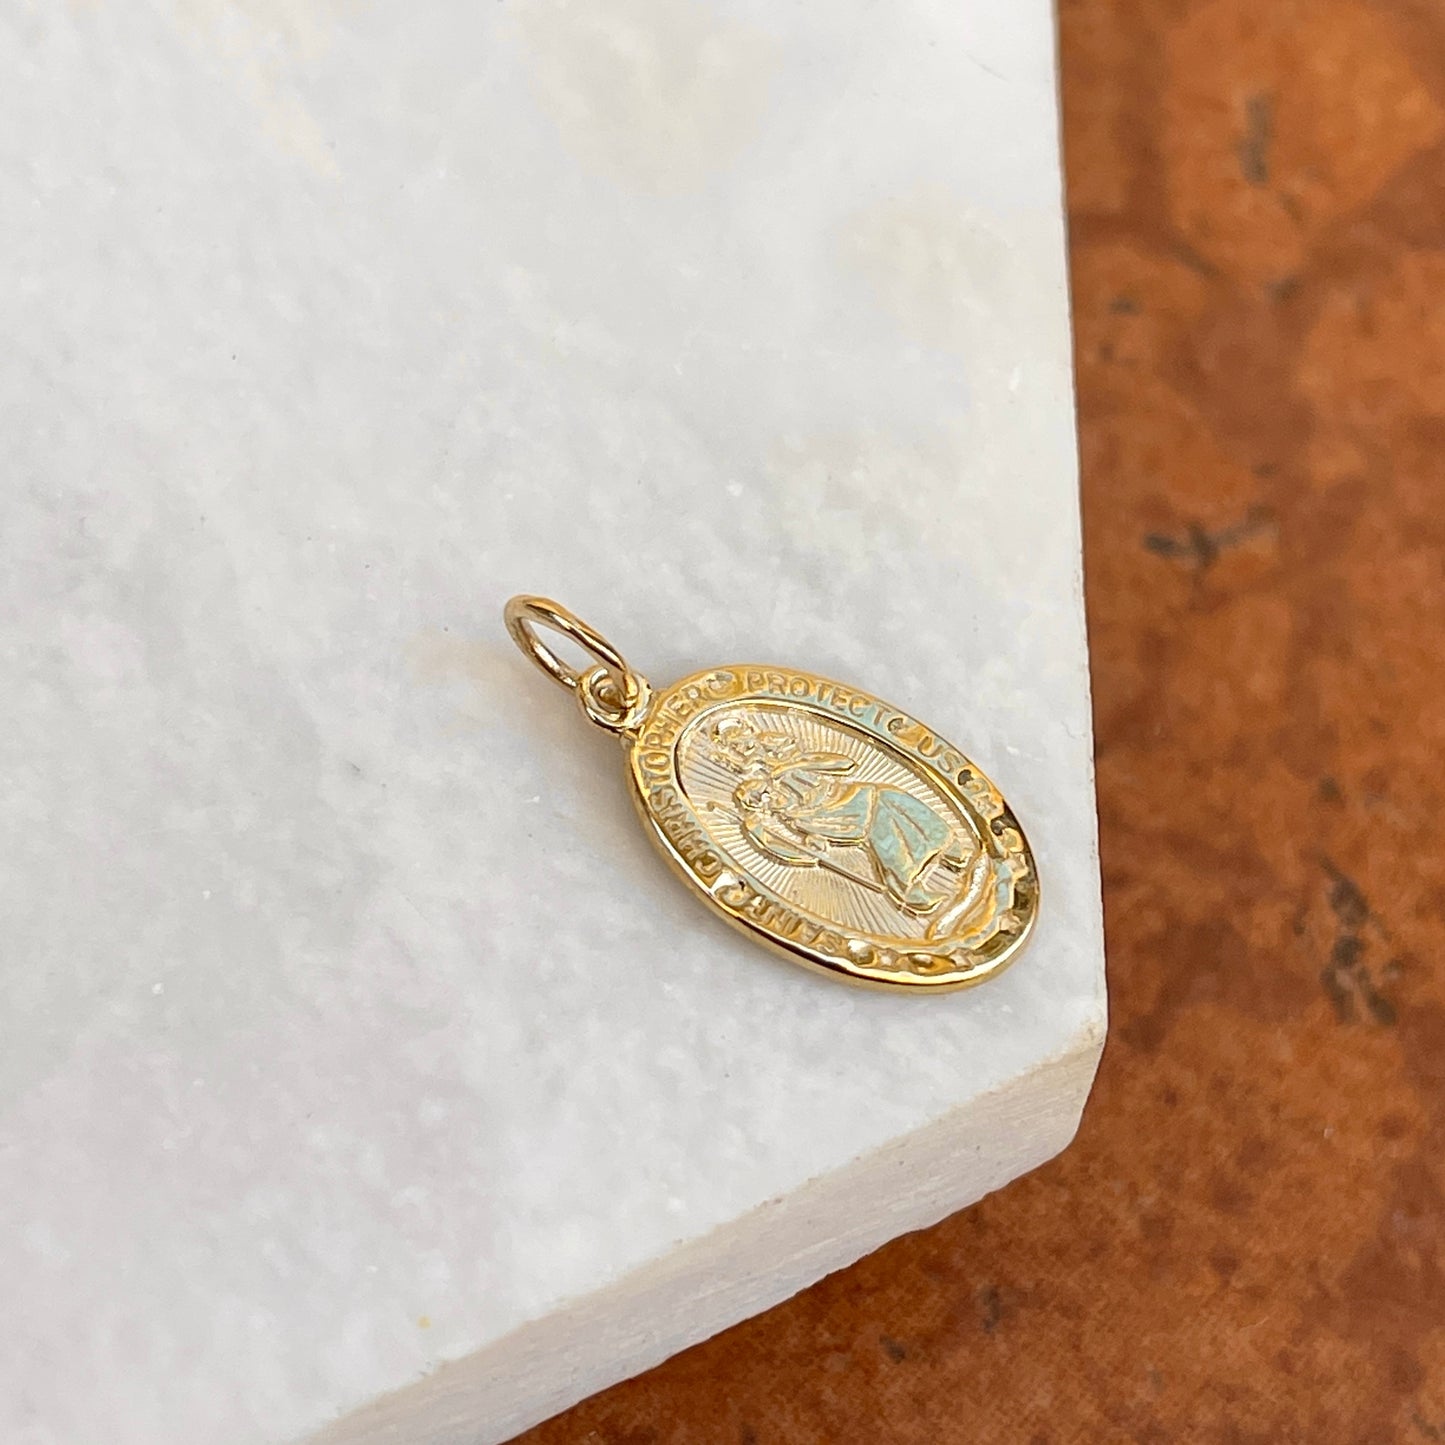 10KT Yellow Gold Oval St Christopher Medal Pendant Charm 16mm